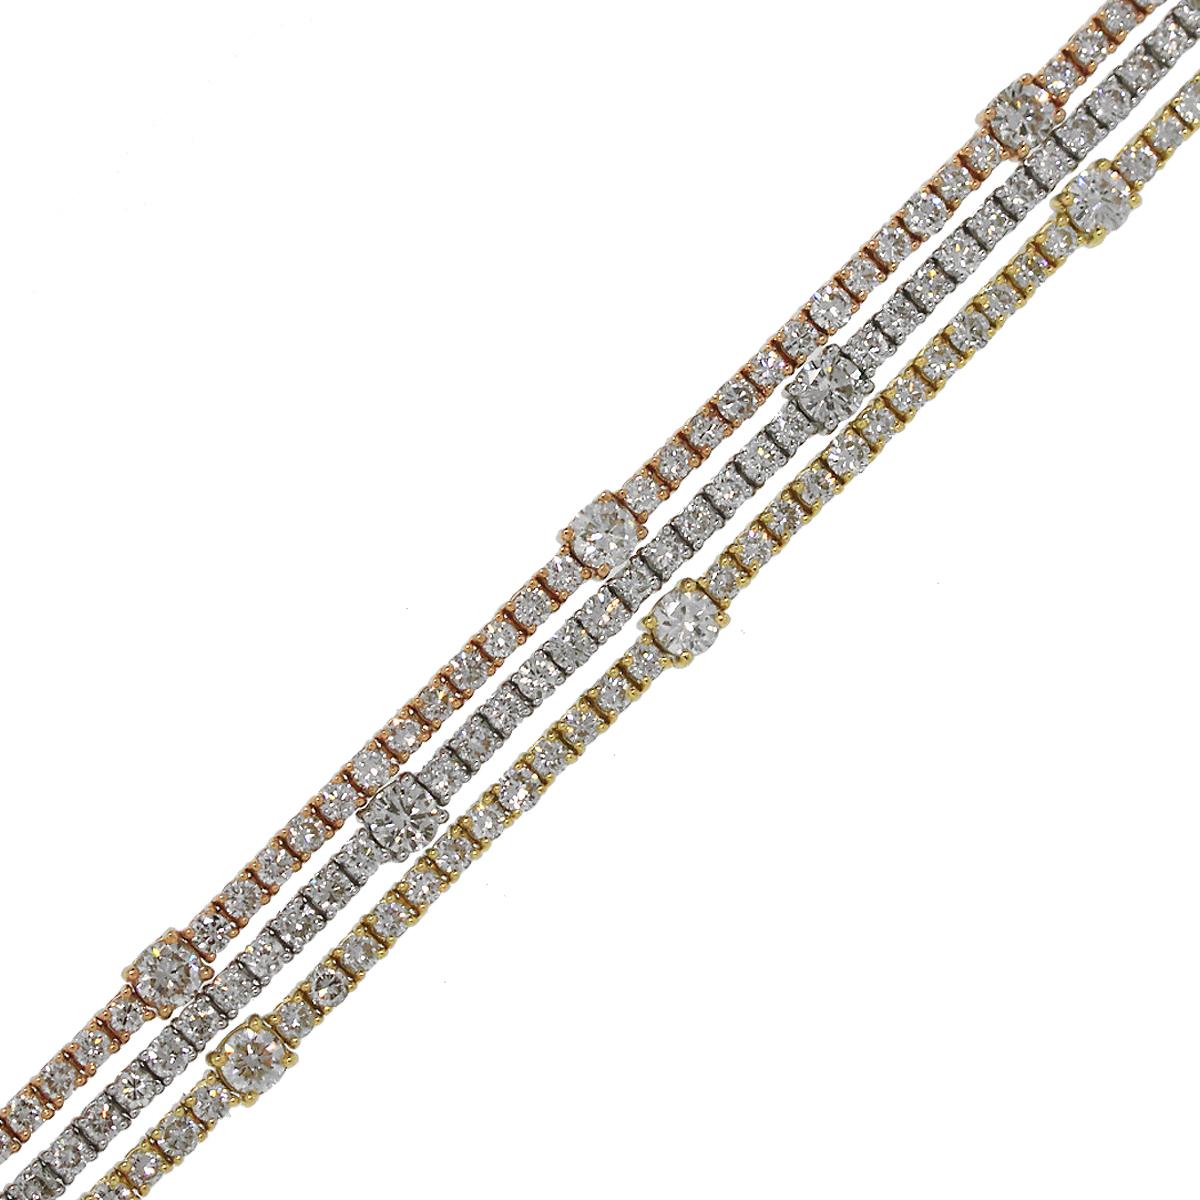 Material: 18k White Gold, 18k Rose Gold, 18k Yellow Gold
Diamond Details: Approximately 9.90ctw round brilliant diamonds. Diamonds are H/I in color and SI1 in clarity.
Clasp: Tongue in box clasp with safety latch
Total Weight: 22.1g